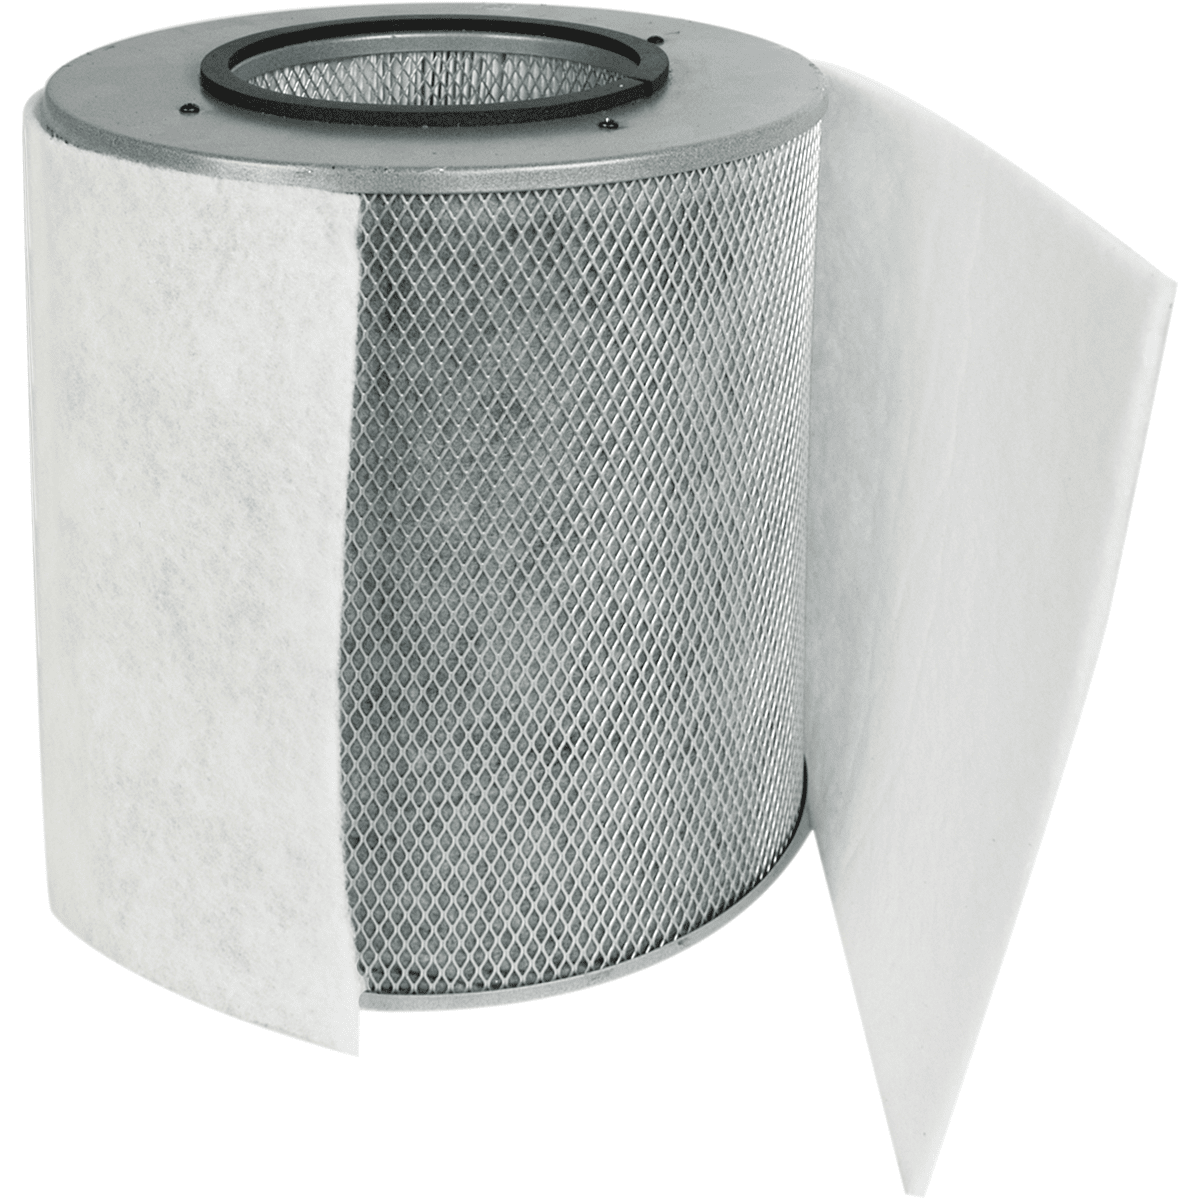 Austin Air Allergy Machine (HEGA) Replacement Filter w/ Prefilter (Light-colored)